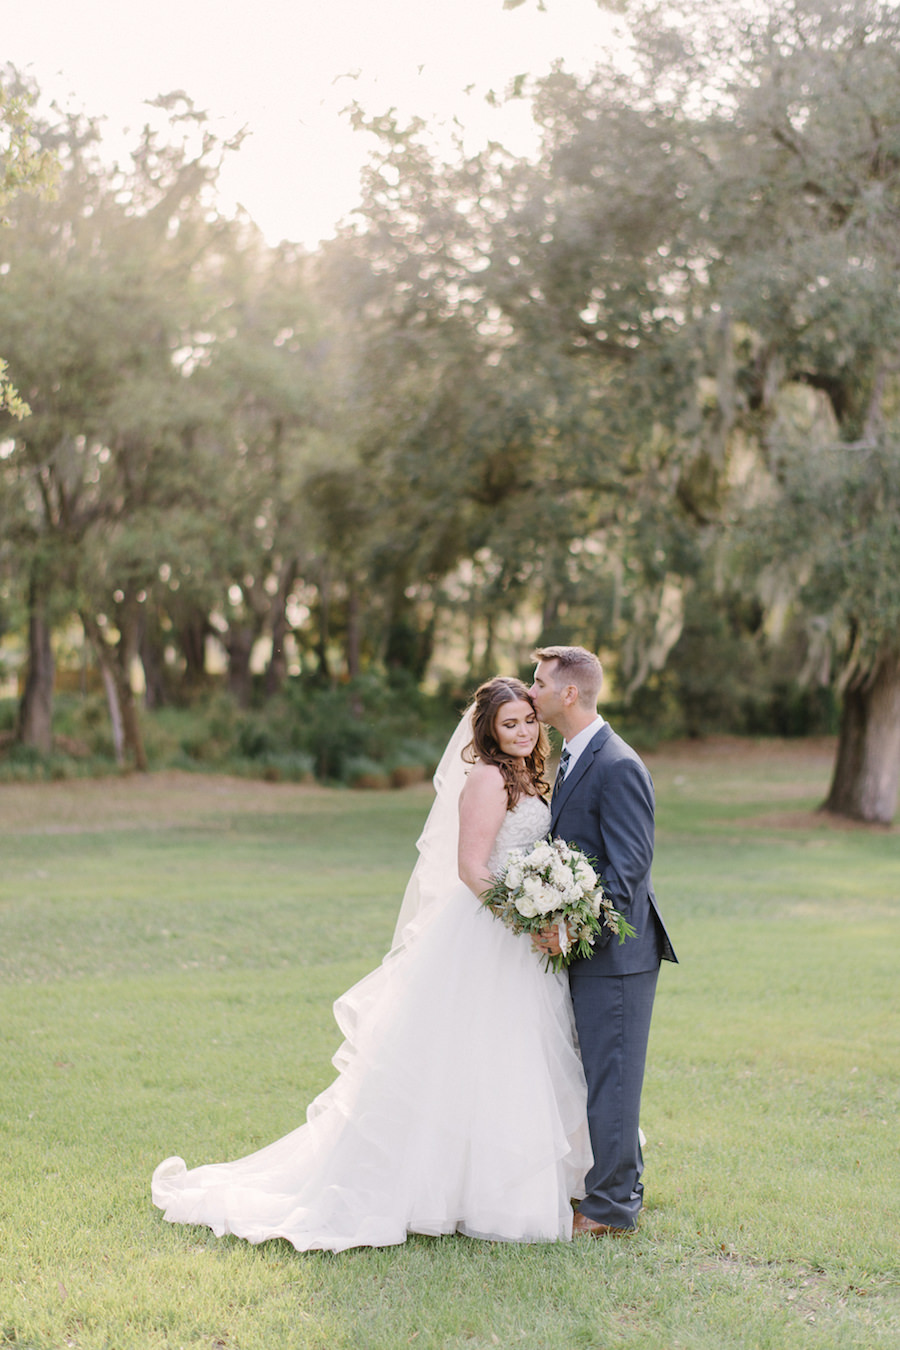 Tampa Bay Bride and Groom Rustic Wedding Day Portrait in White Essence of Australia Wedding Gown